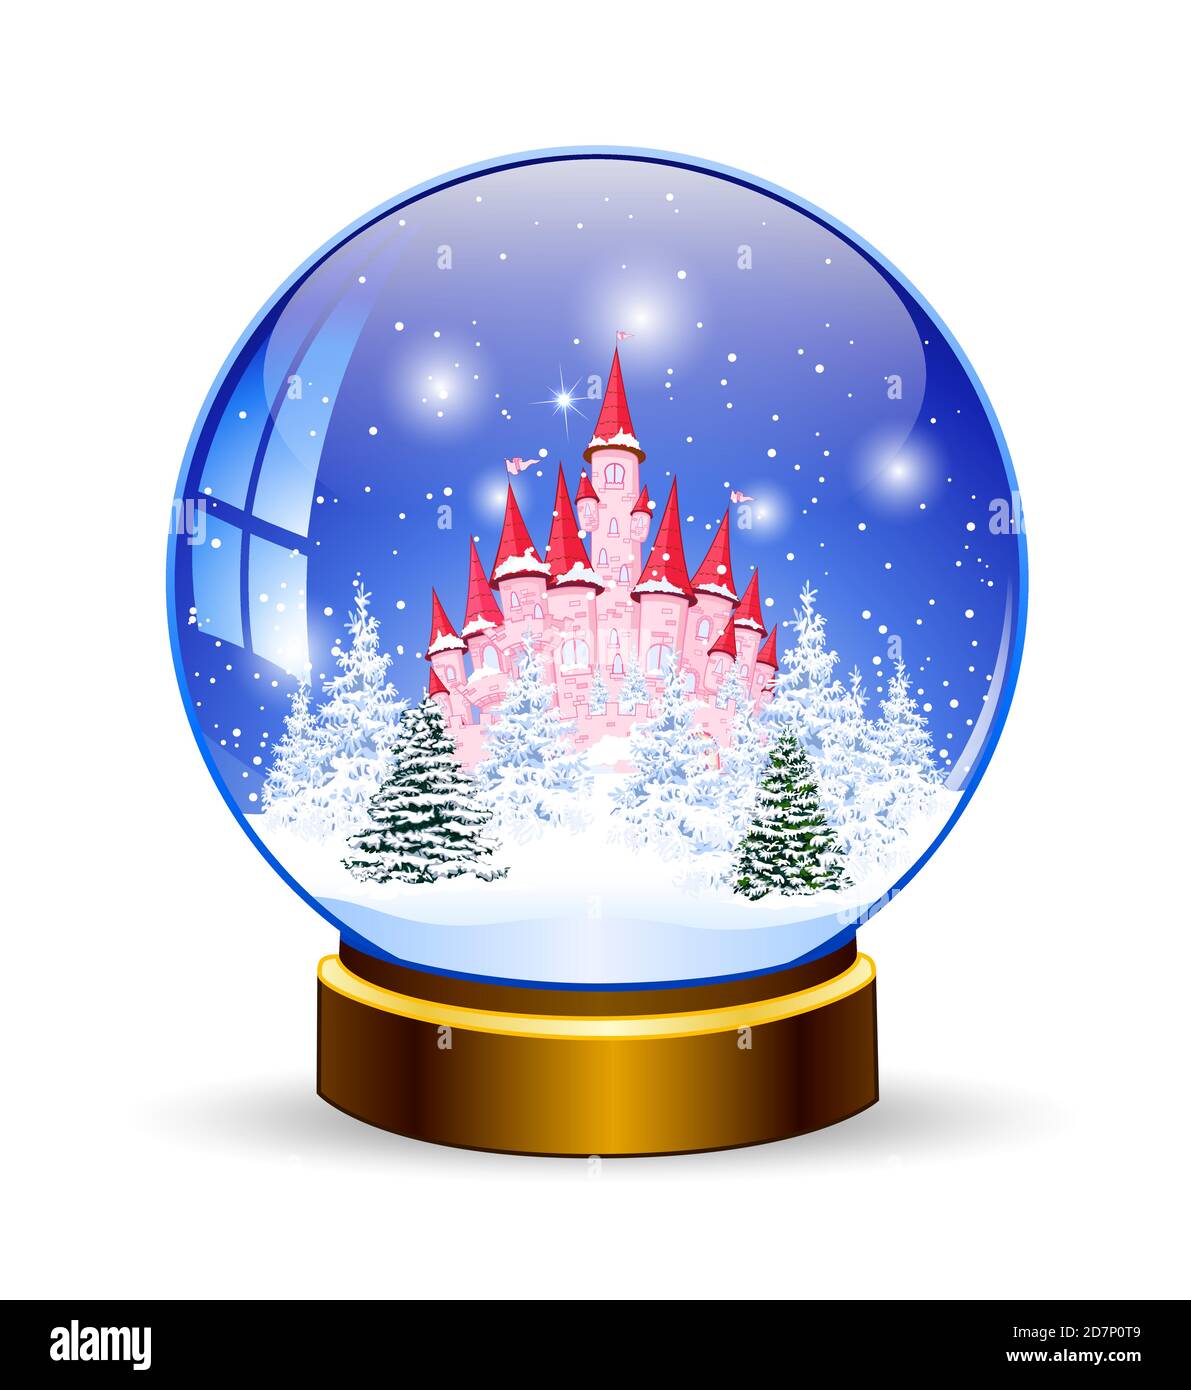 Snow ball. Princess castle on the background of a winter snowy forest. Winter landscape. Glass ball on a stand. Souvenir. Stock Vector